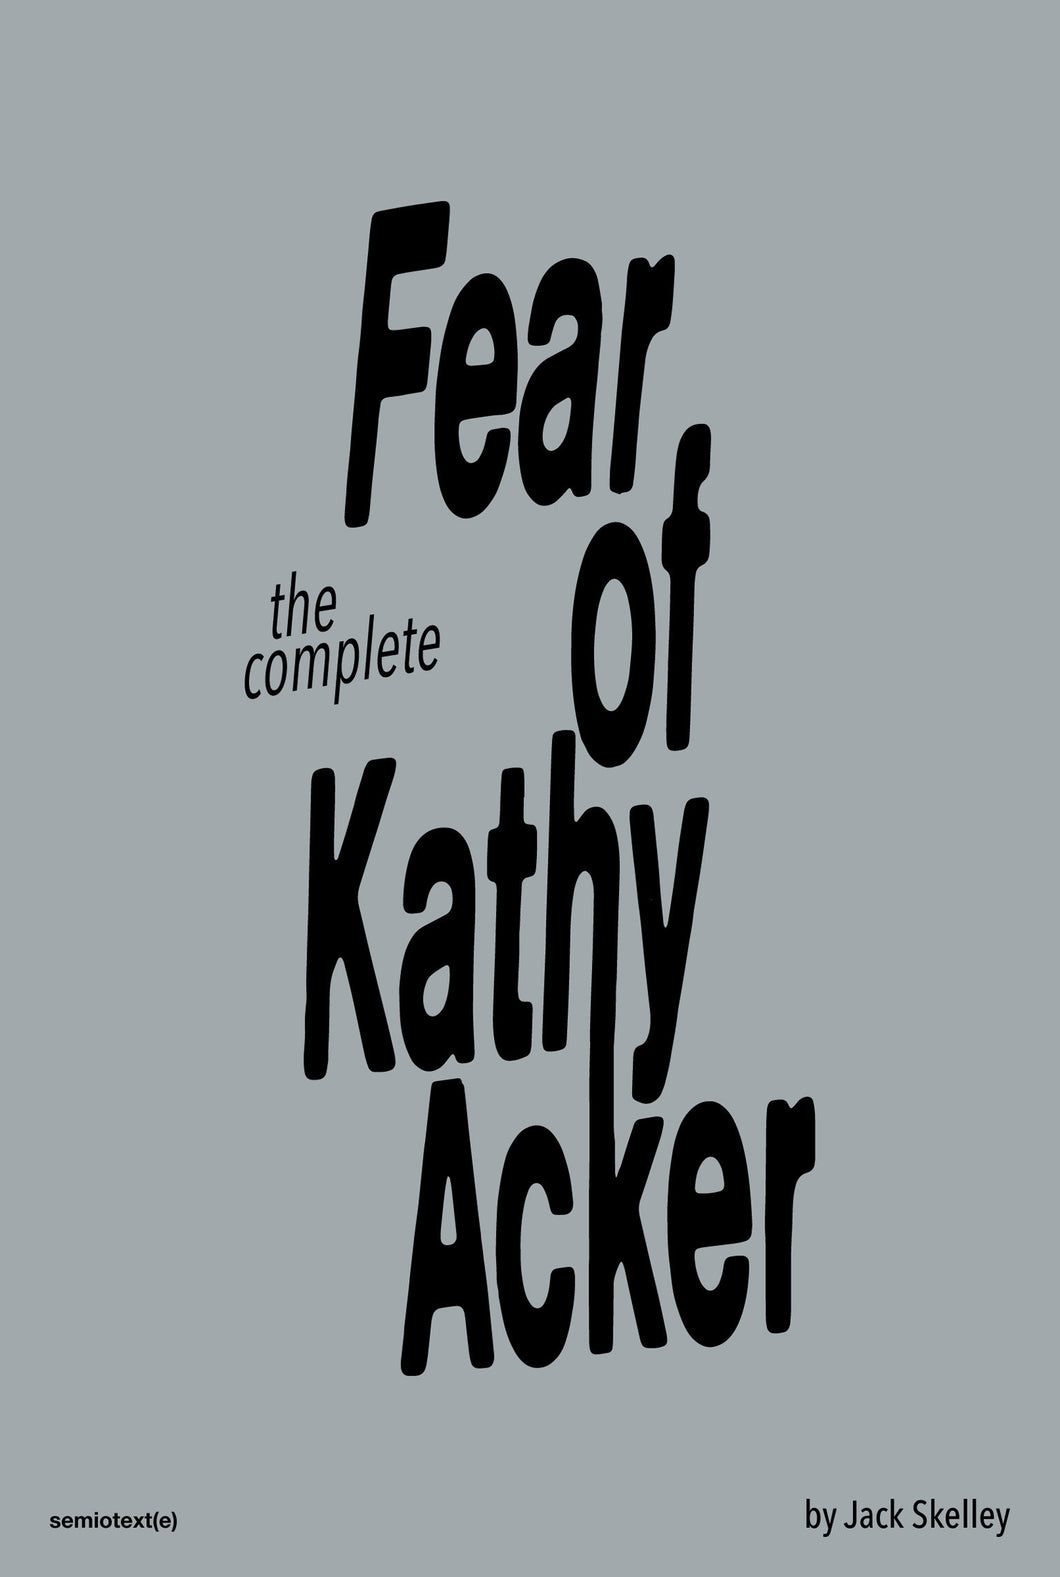 The Complete Fear of Kathy Acker